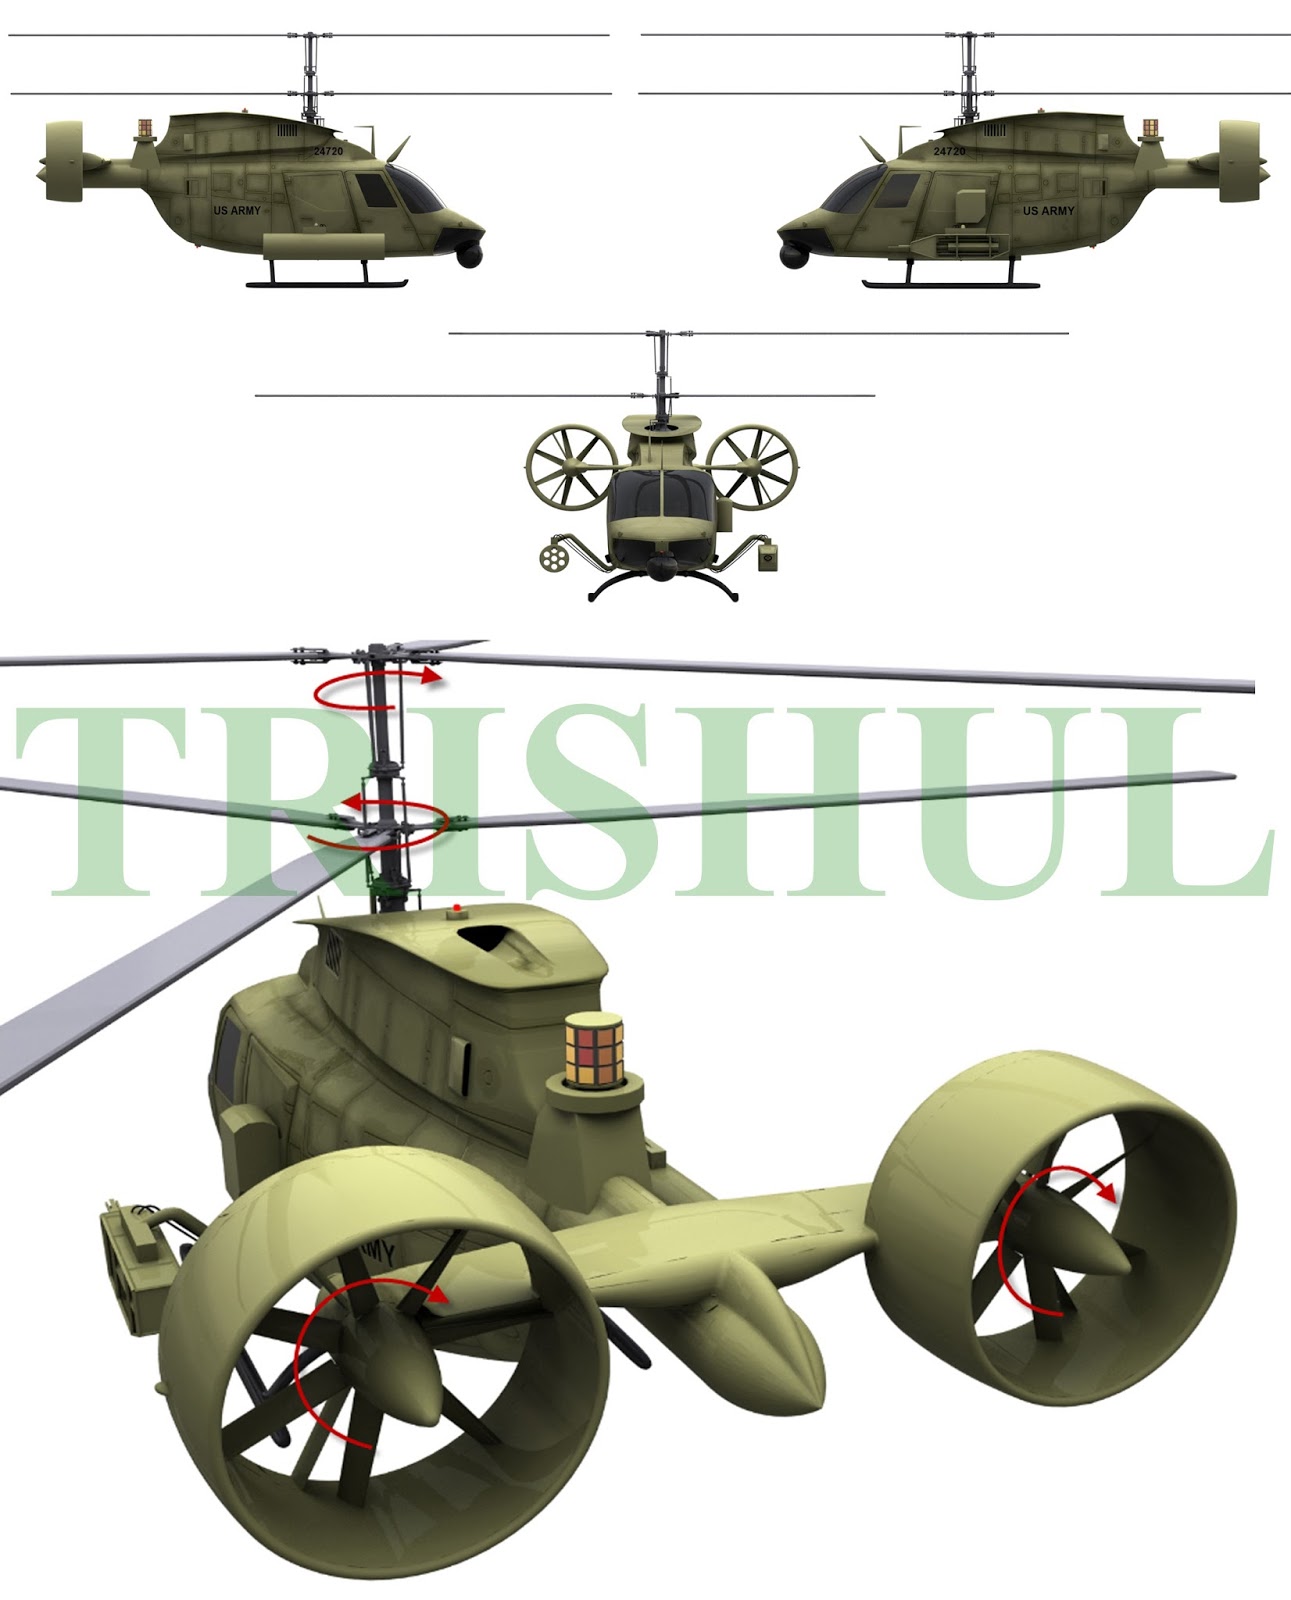 AVX Aircraft-designed LUH with co-axial rotors & ducted fans.jpg